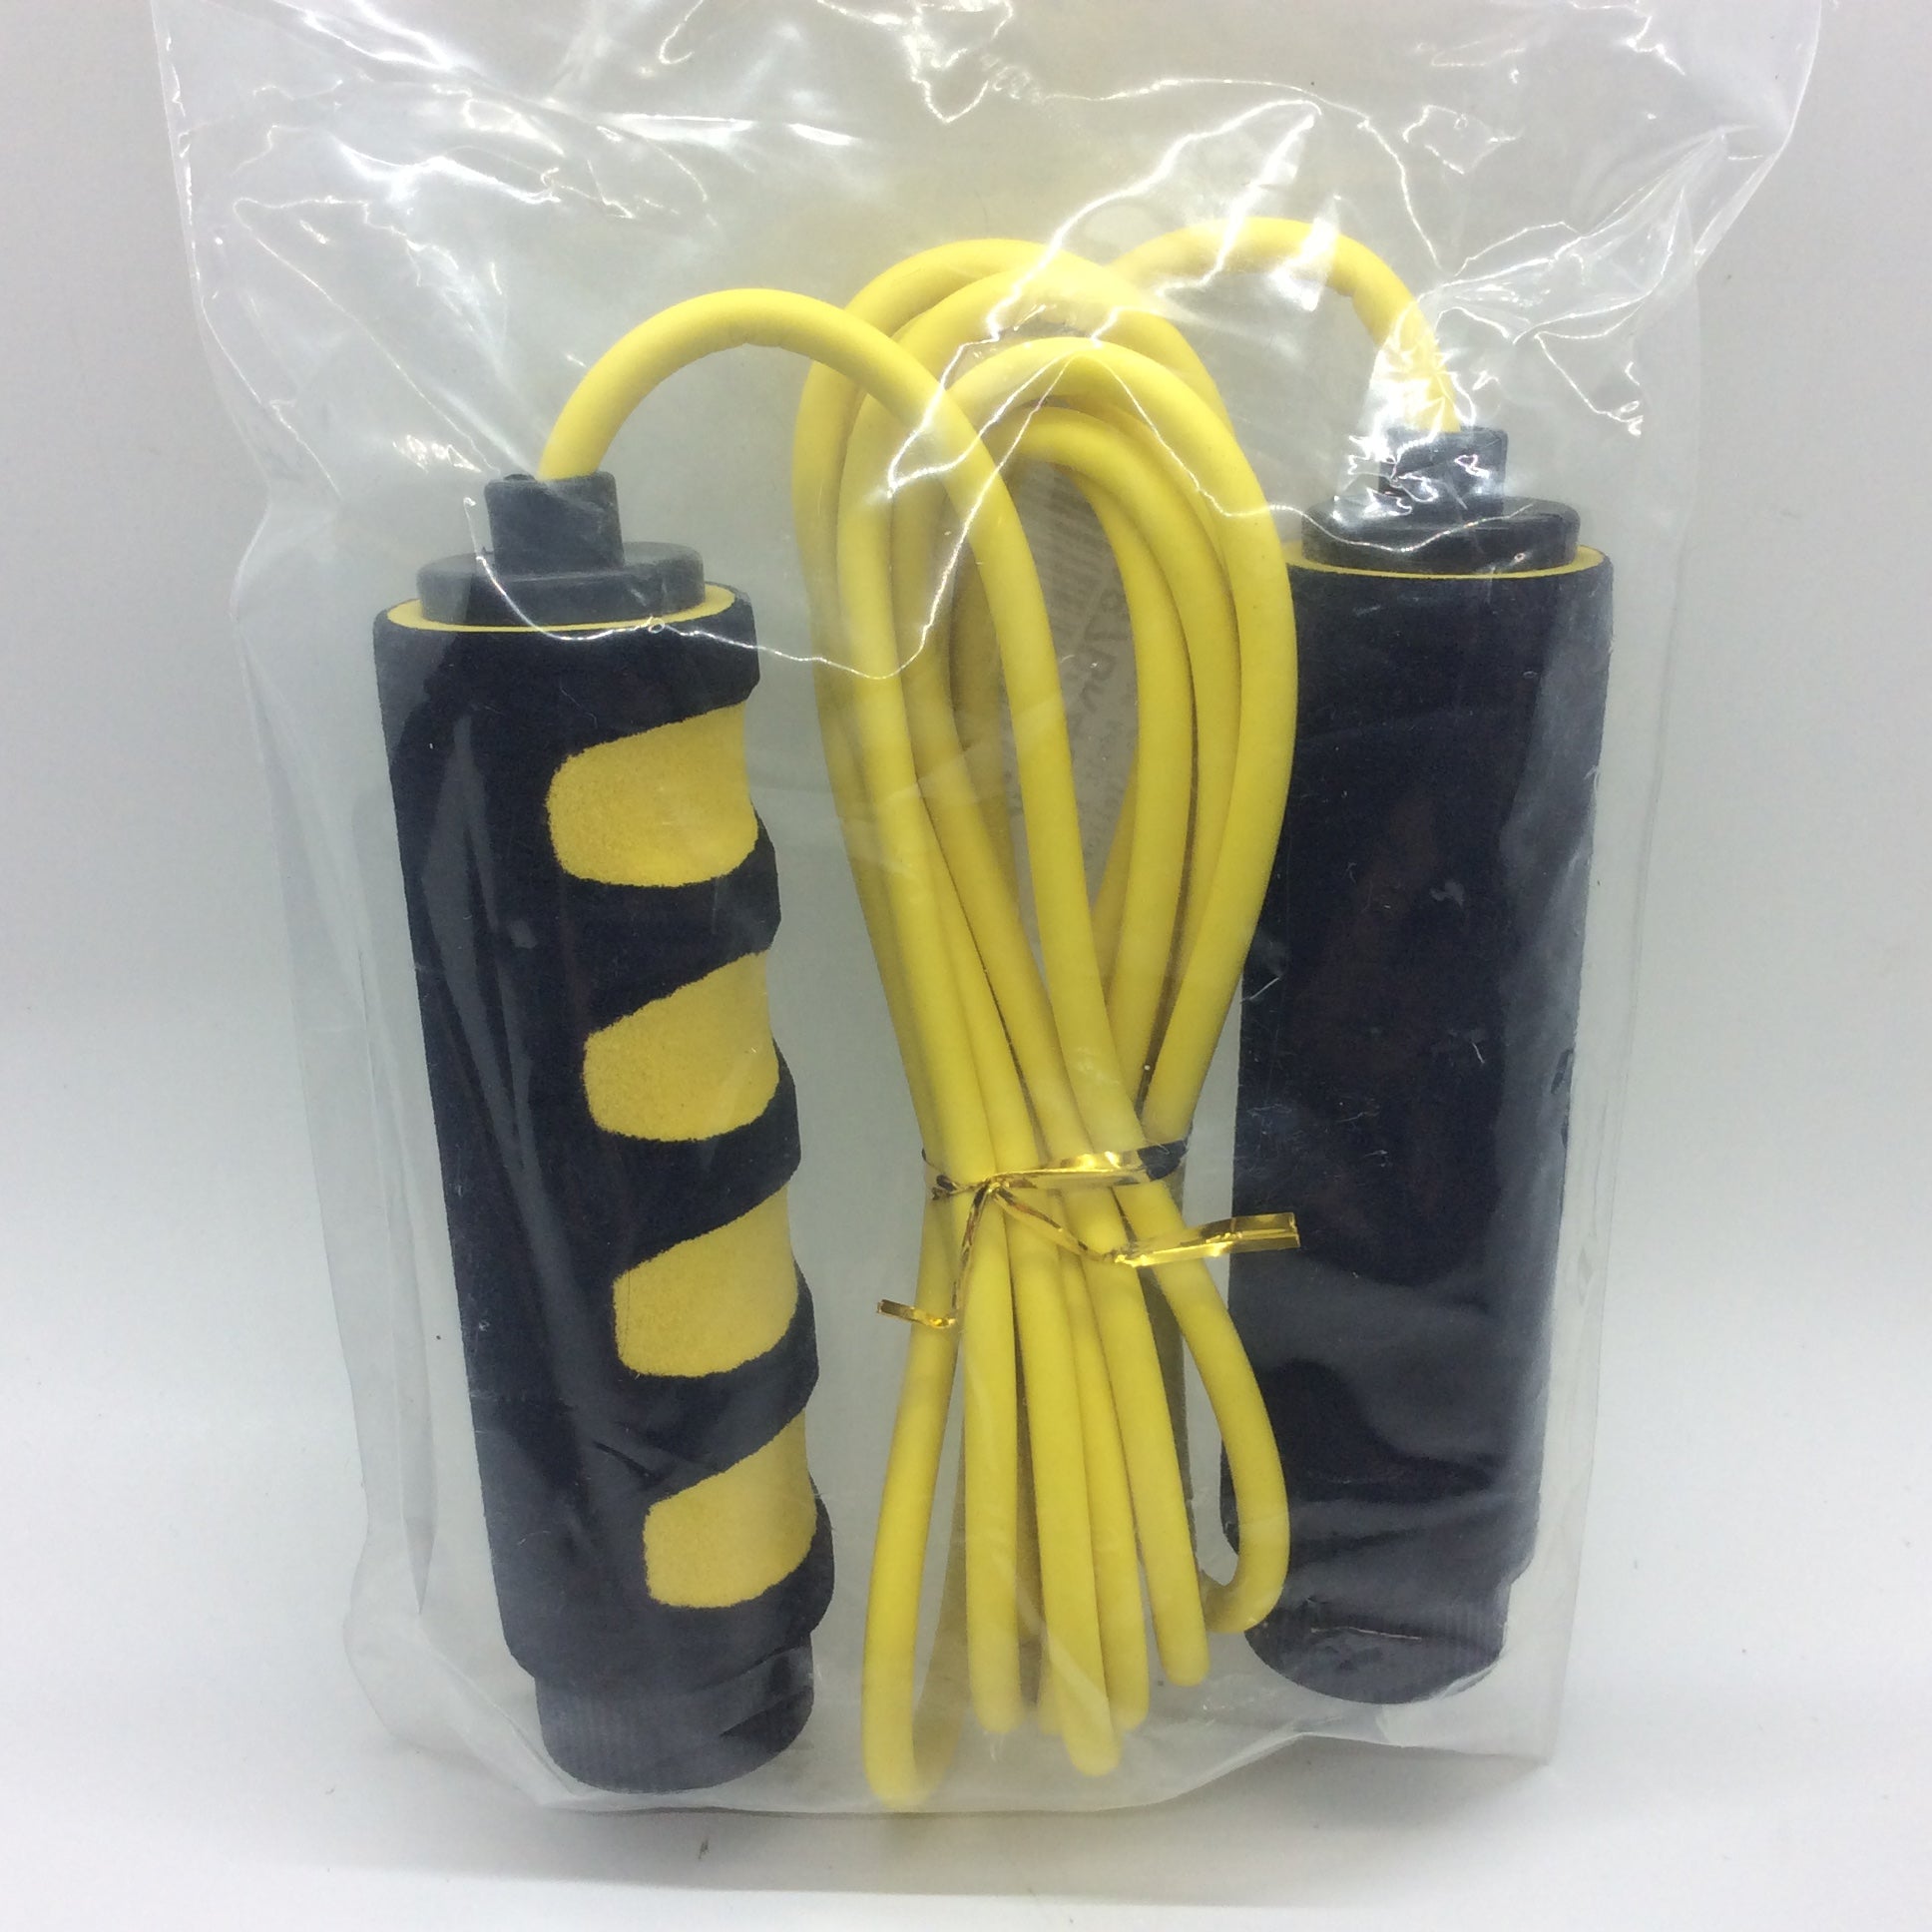 a pair of yellow and black cords in a package